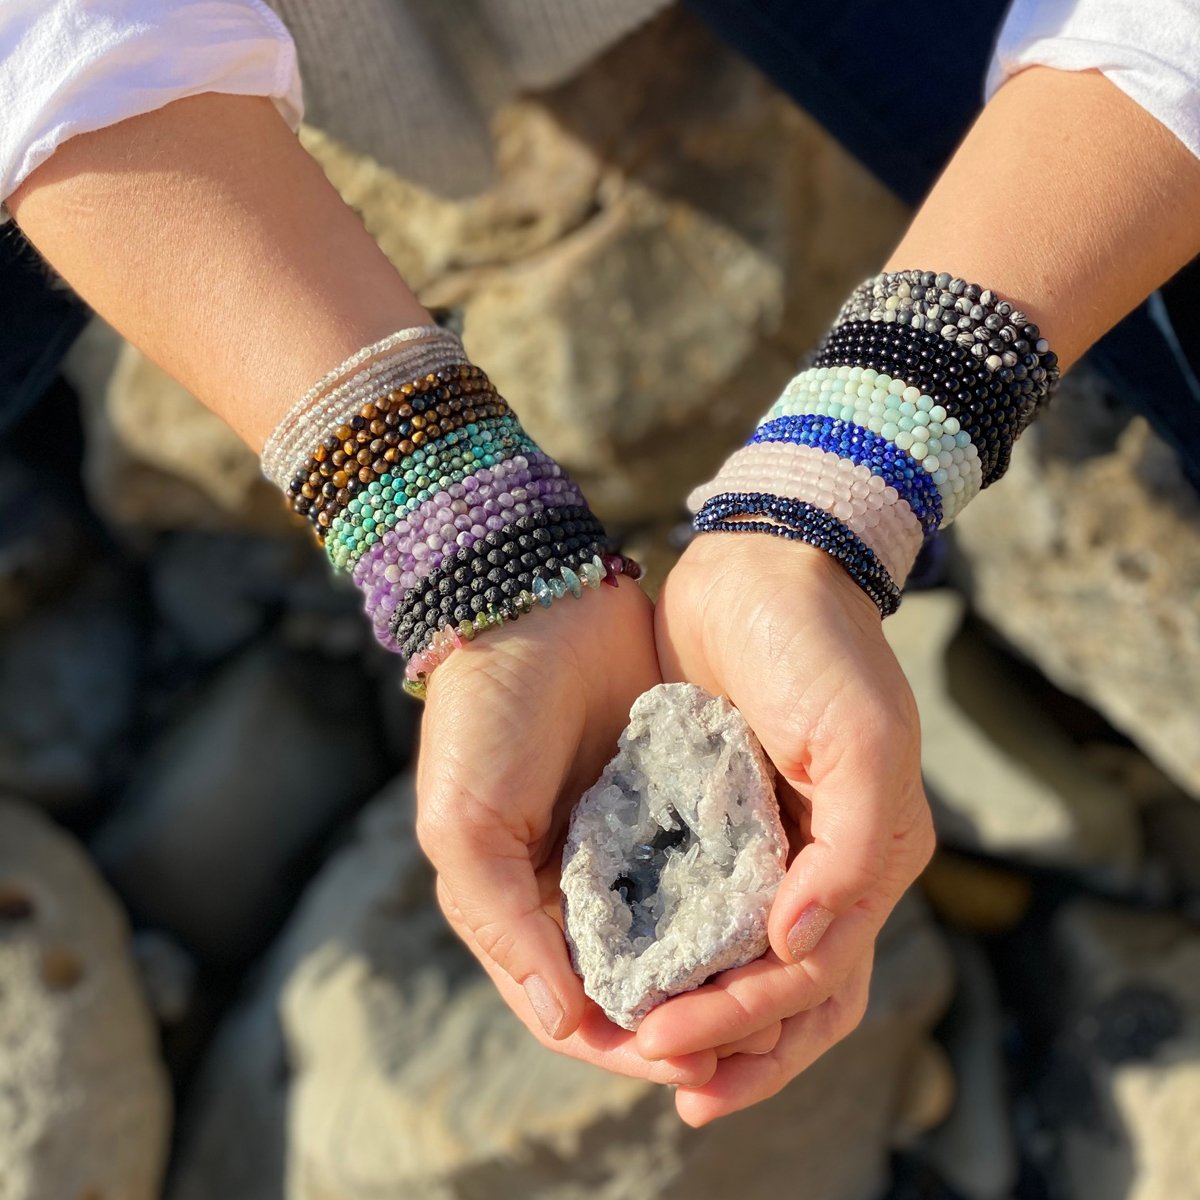 Each month you will receive a surprise Healing Crystal Wrap Bracelet that is not yet available on the web to work with supportive energies.